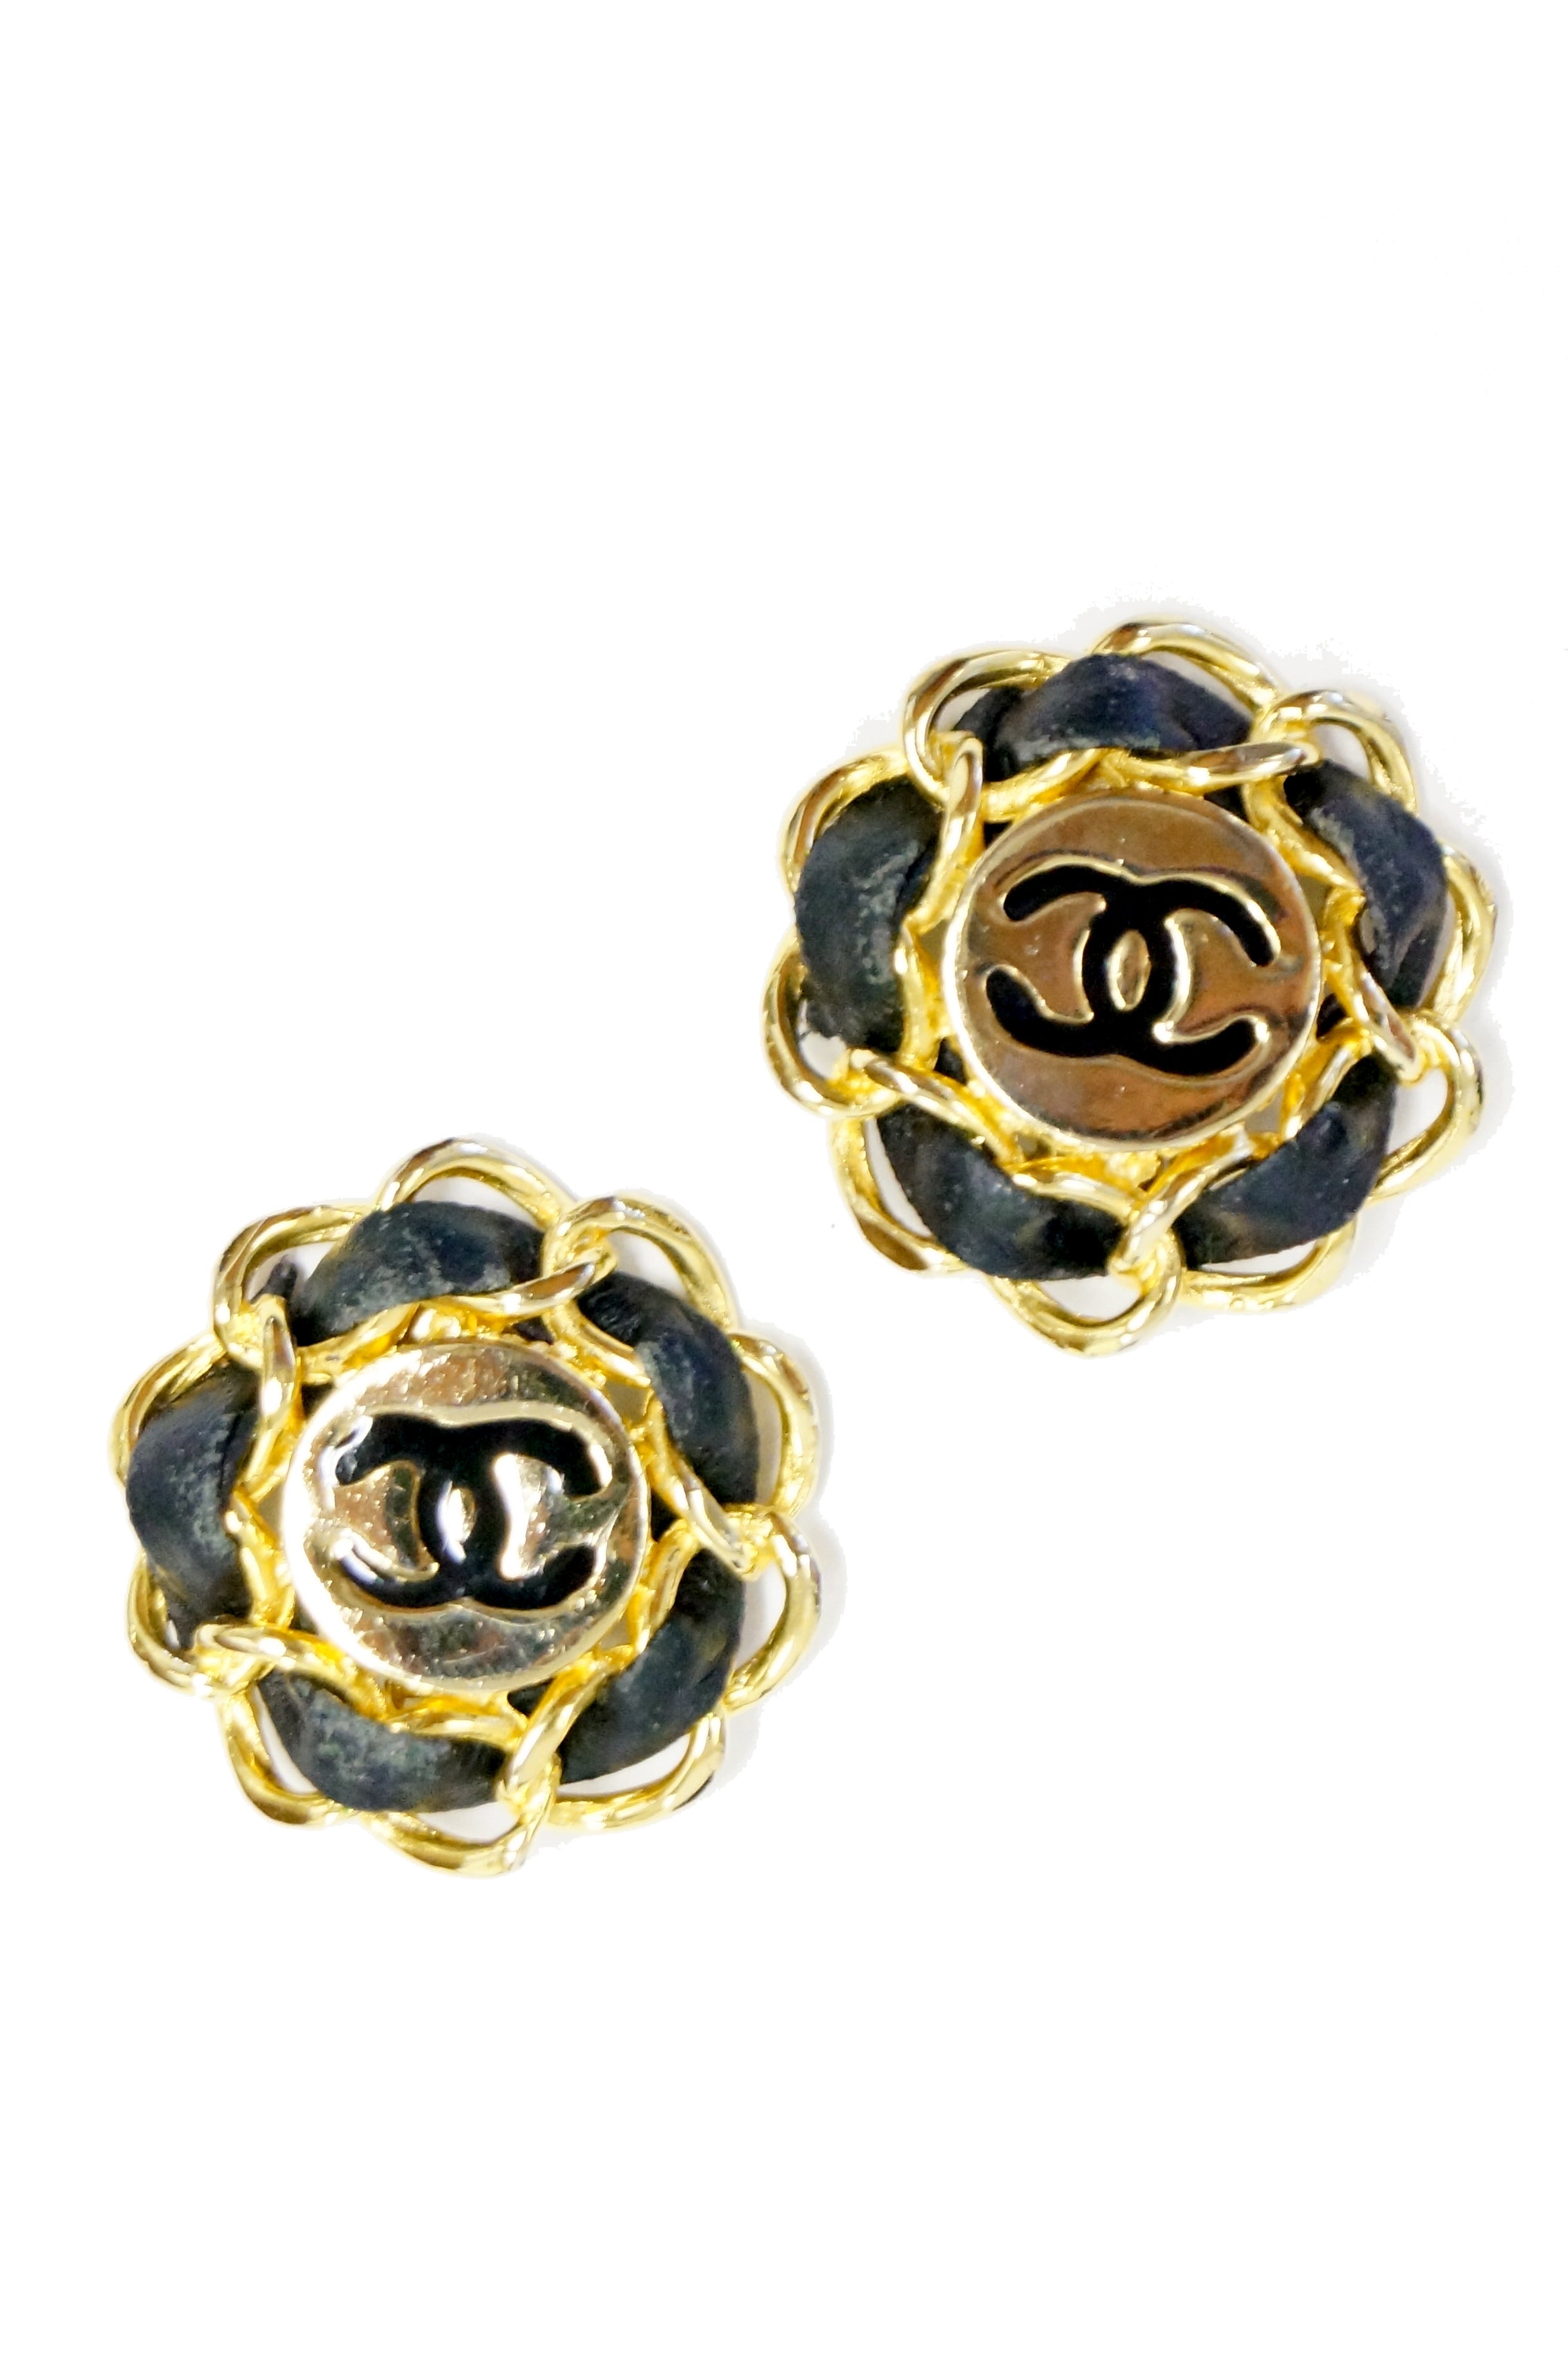 CHANEL Gold-Plated CC Cut-Out Logo Hoop Clip-On Earrings 1980s